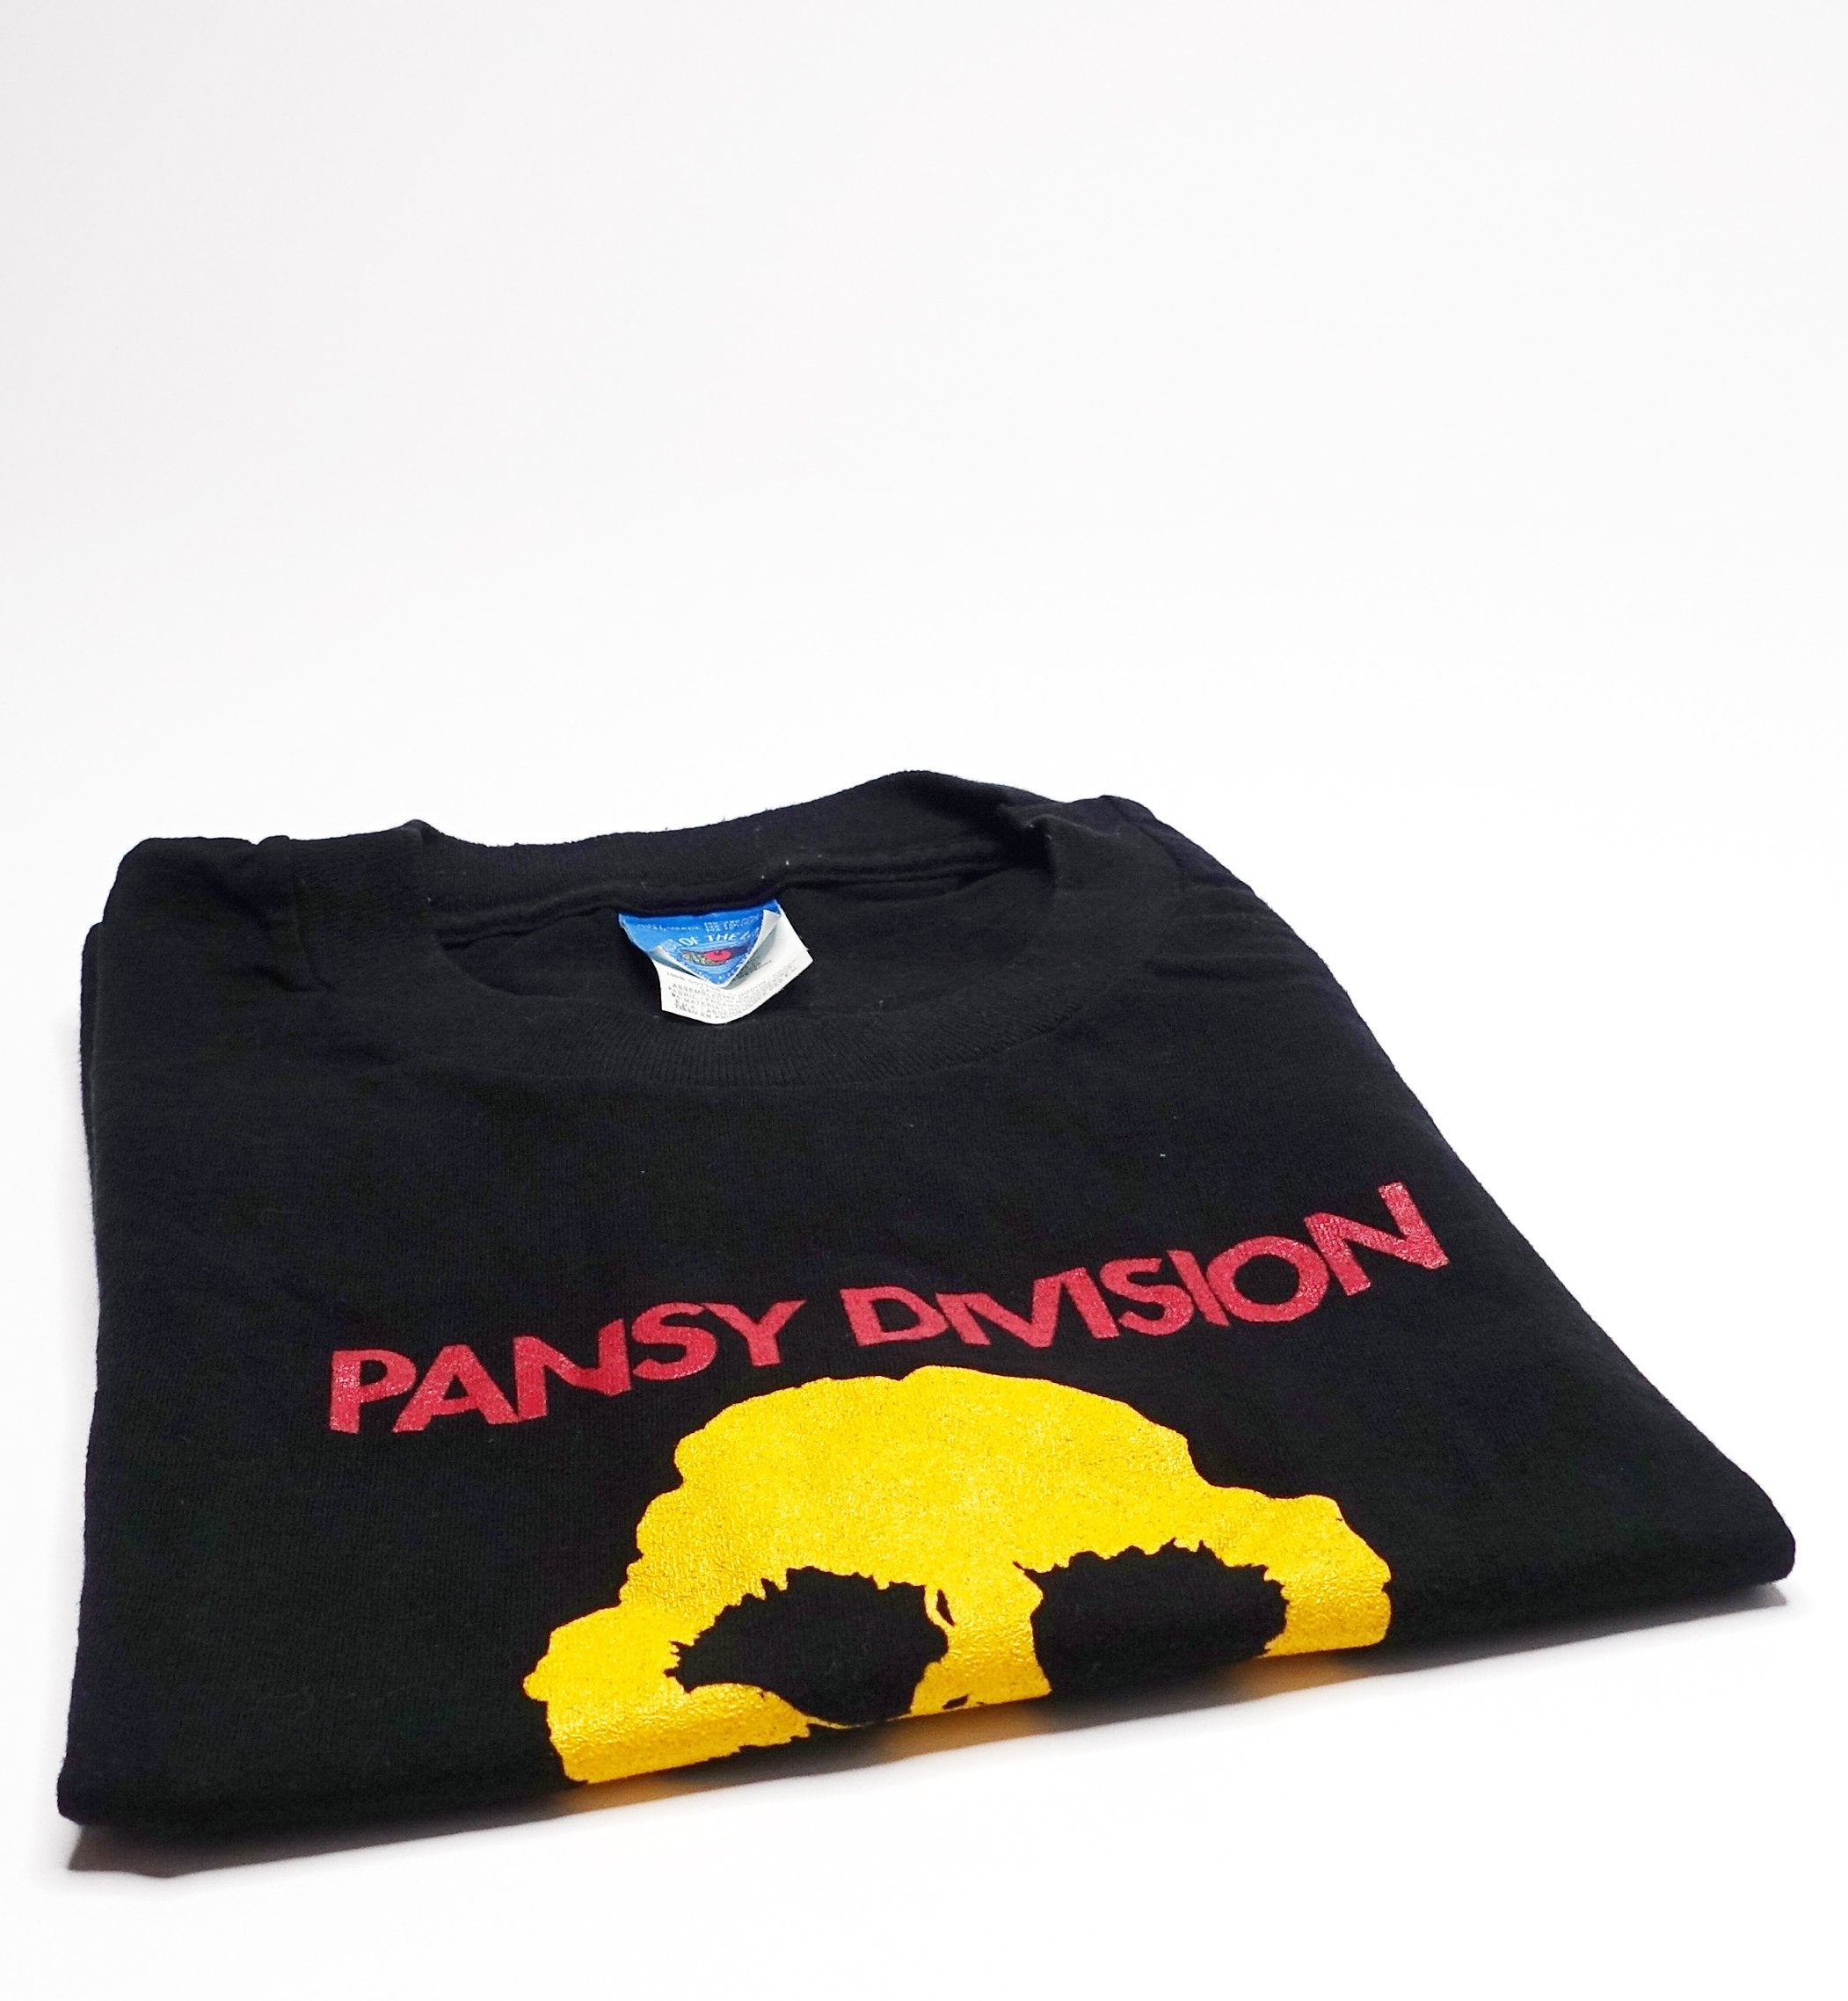 Pansy Division - Deflowered 1994 Tour Shirt Size Large